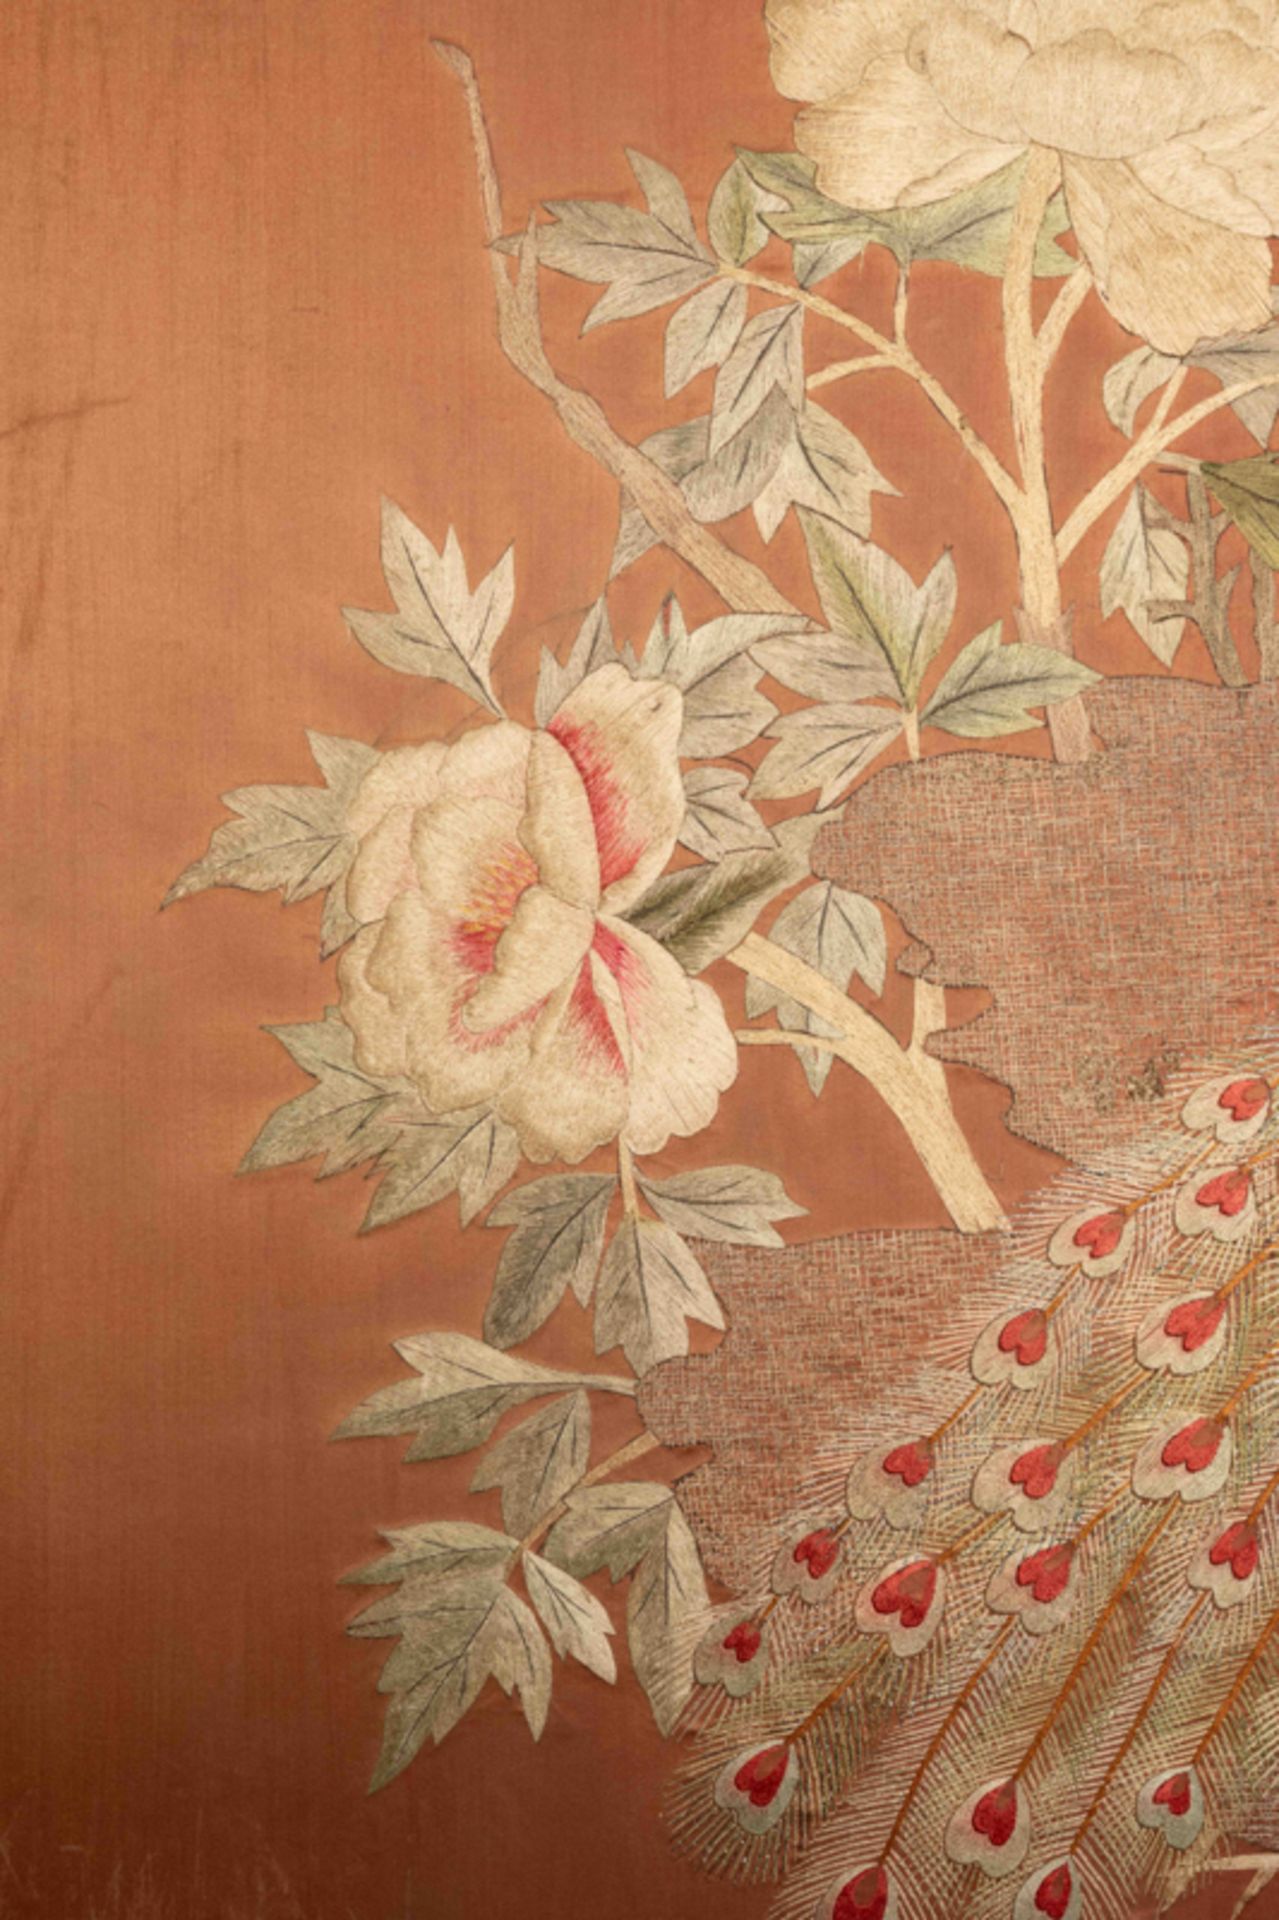 A TWO-PANEL FOLDING SCREEN WITH EMBROIDERED PEONY AND PEACOCK 孔雀牡丹圖刺繡 屏風 - Image 5 of 7